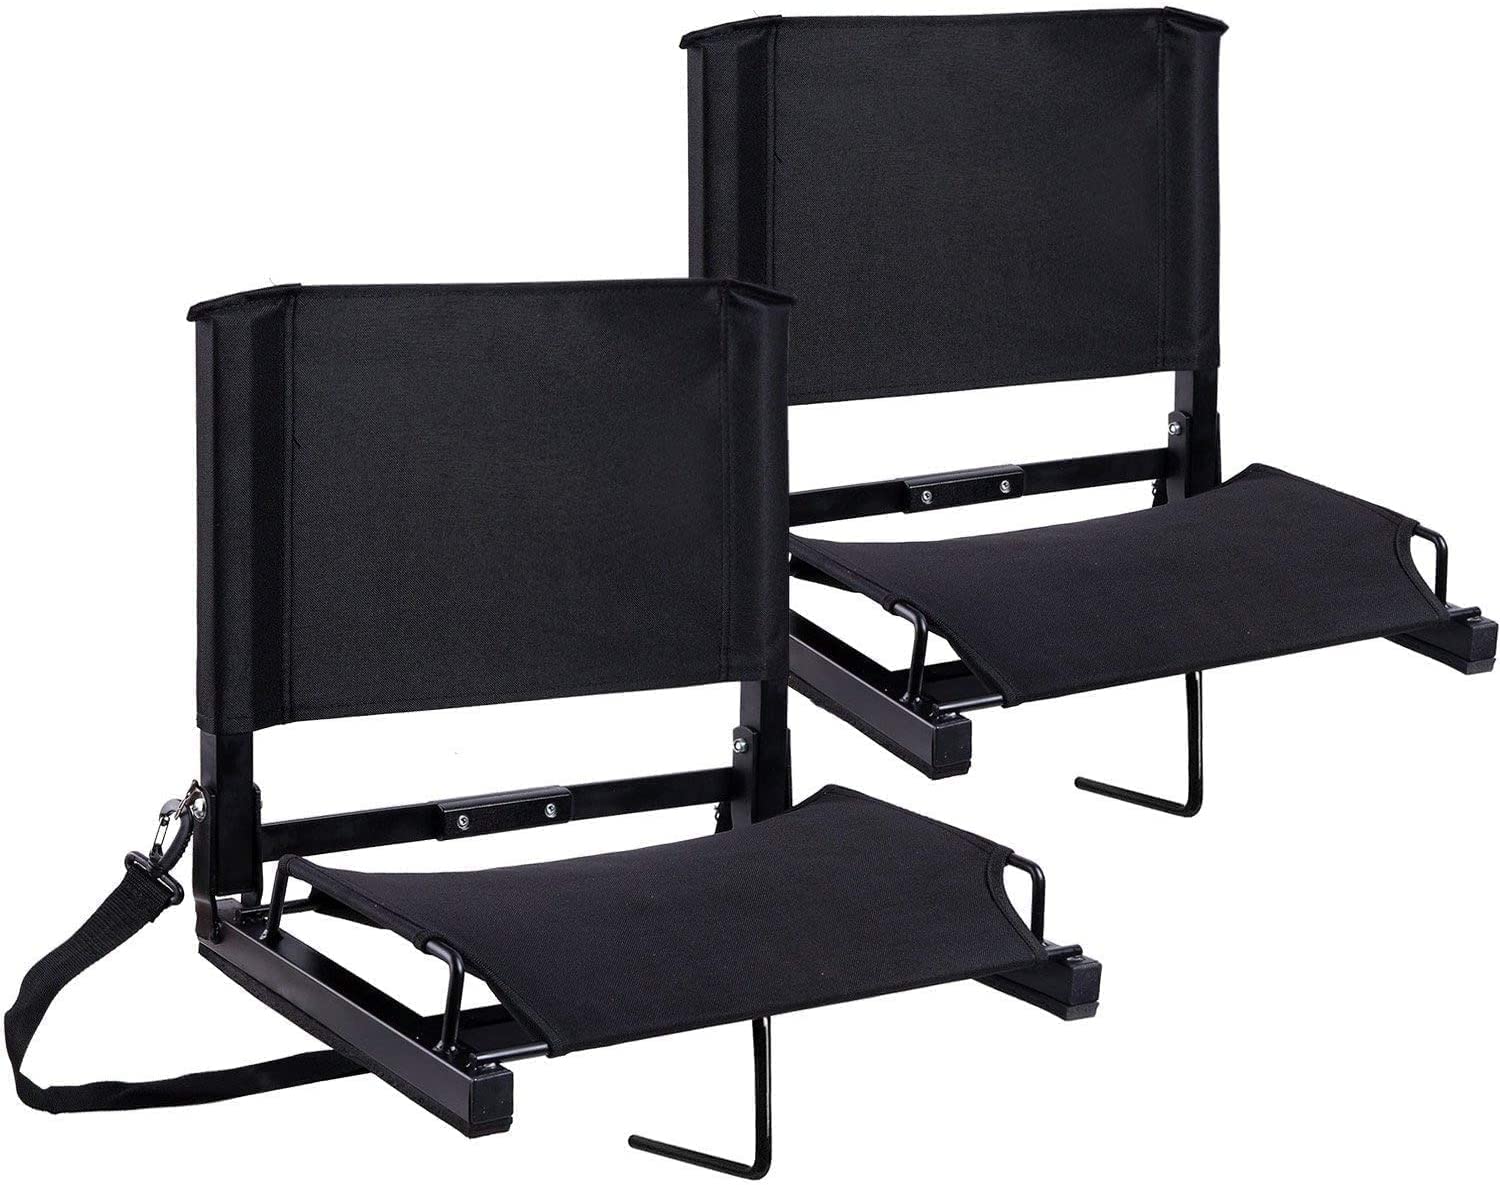 Ohuhu Stadium Seats/Stadium Chairs Bleacher Seats with Bungee Cord Cushion and Comfortable Backrest, 2 Pack